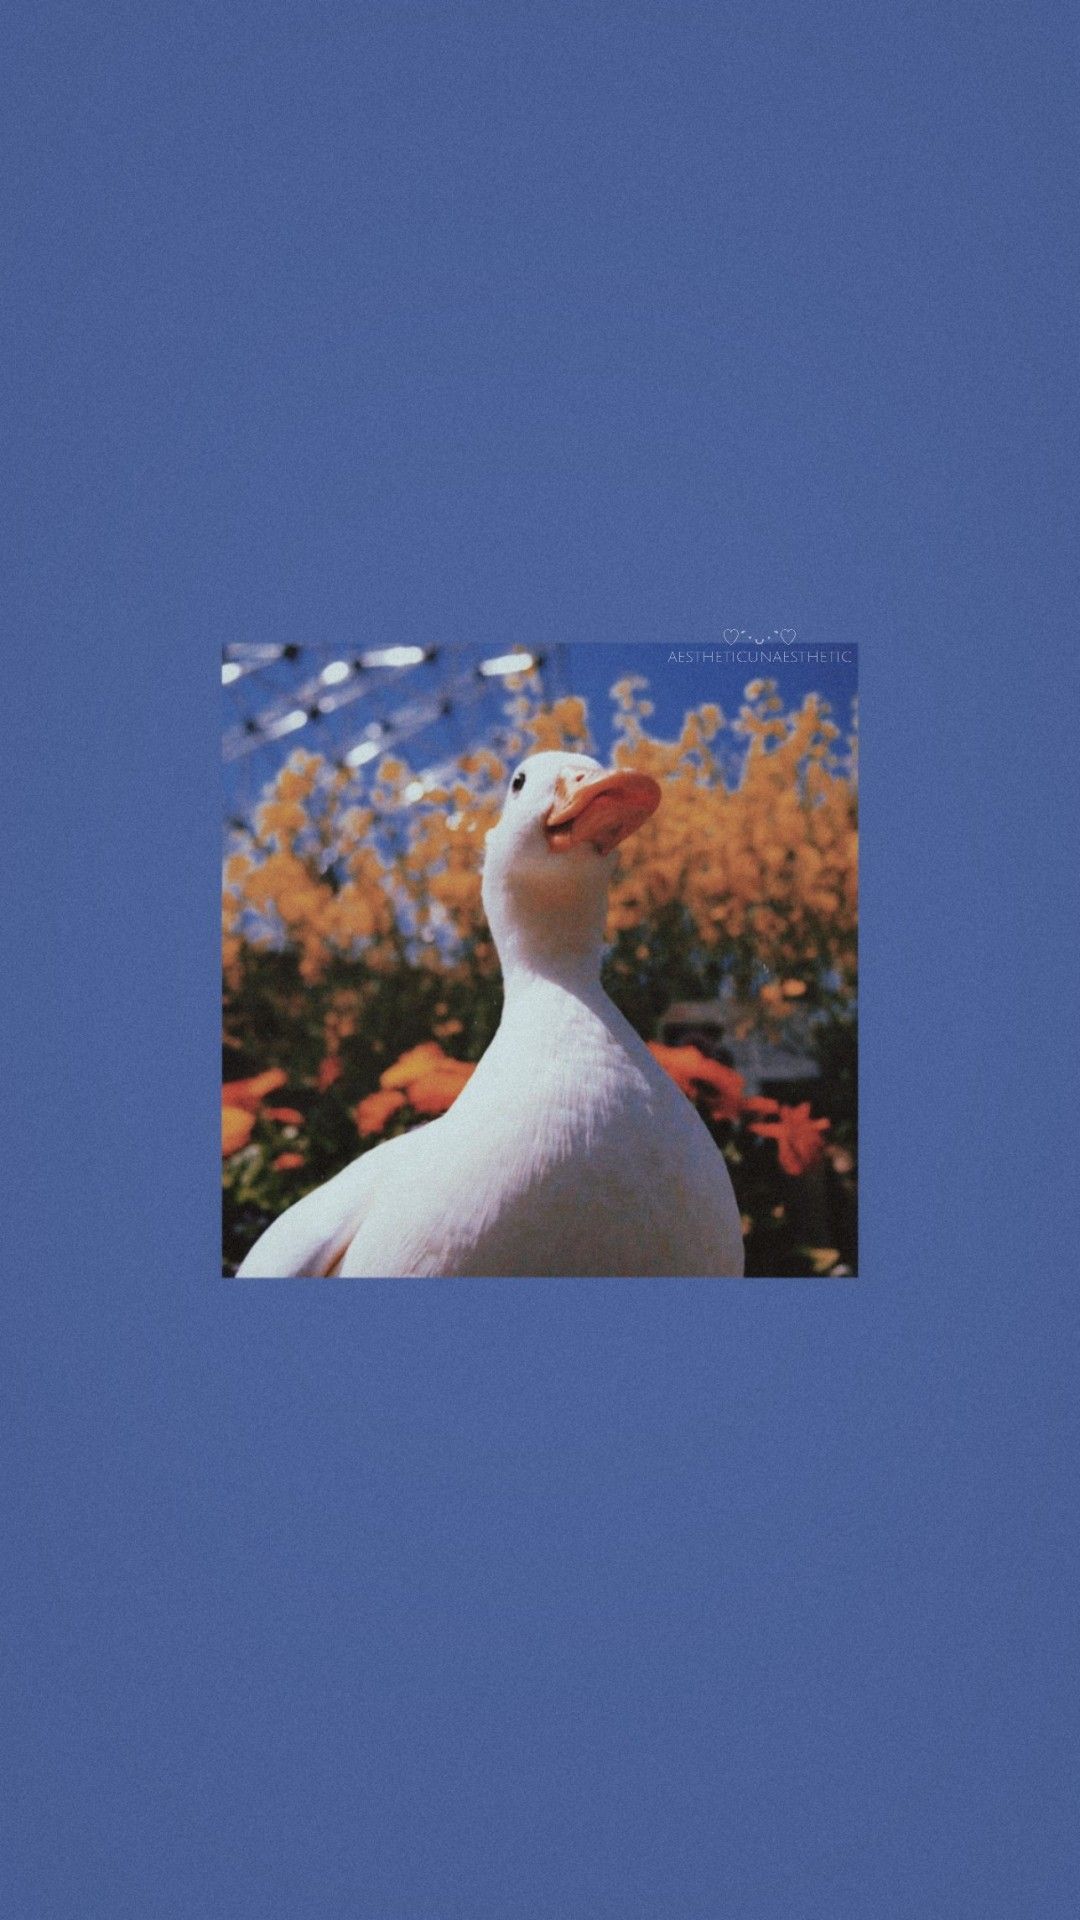 A white duck is standing in front of flowers - Duck